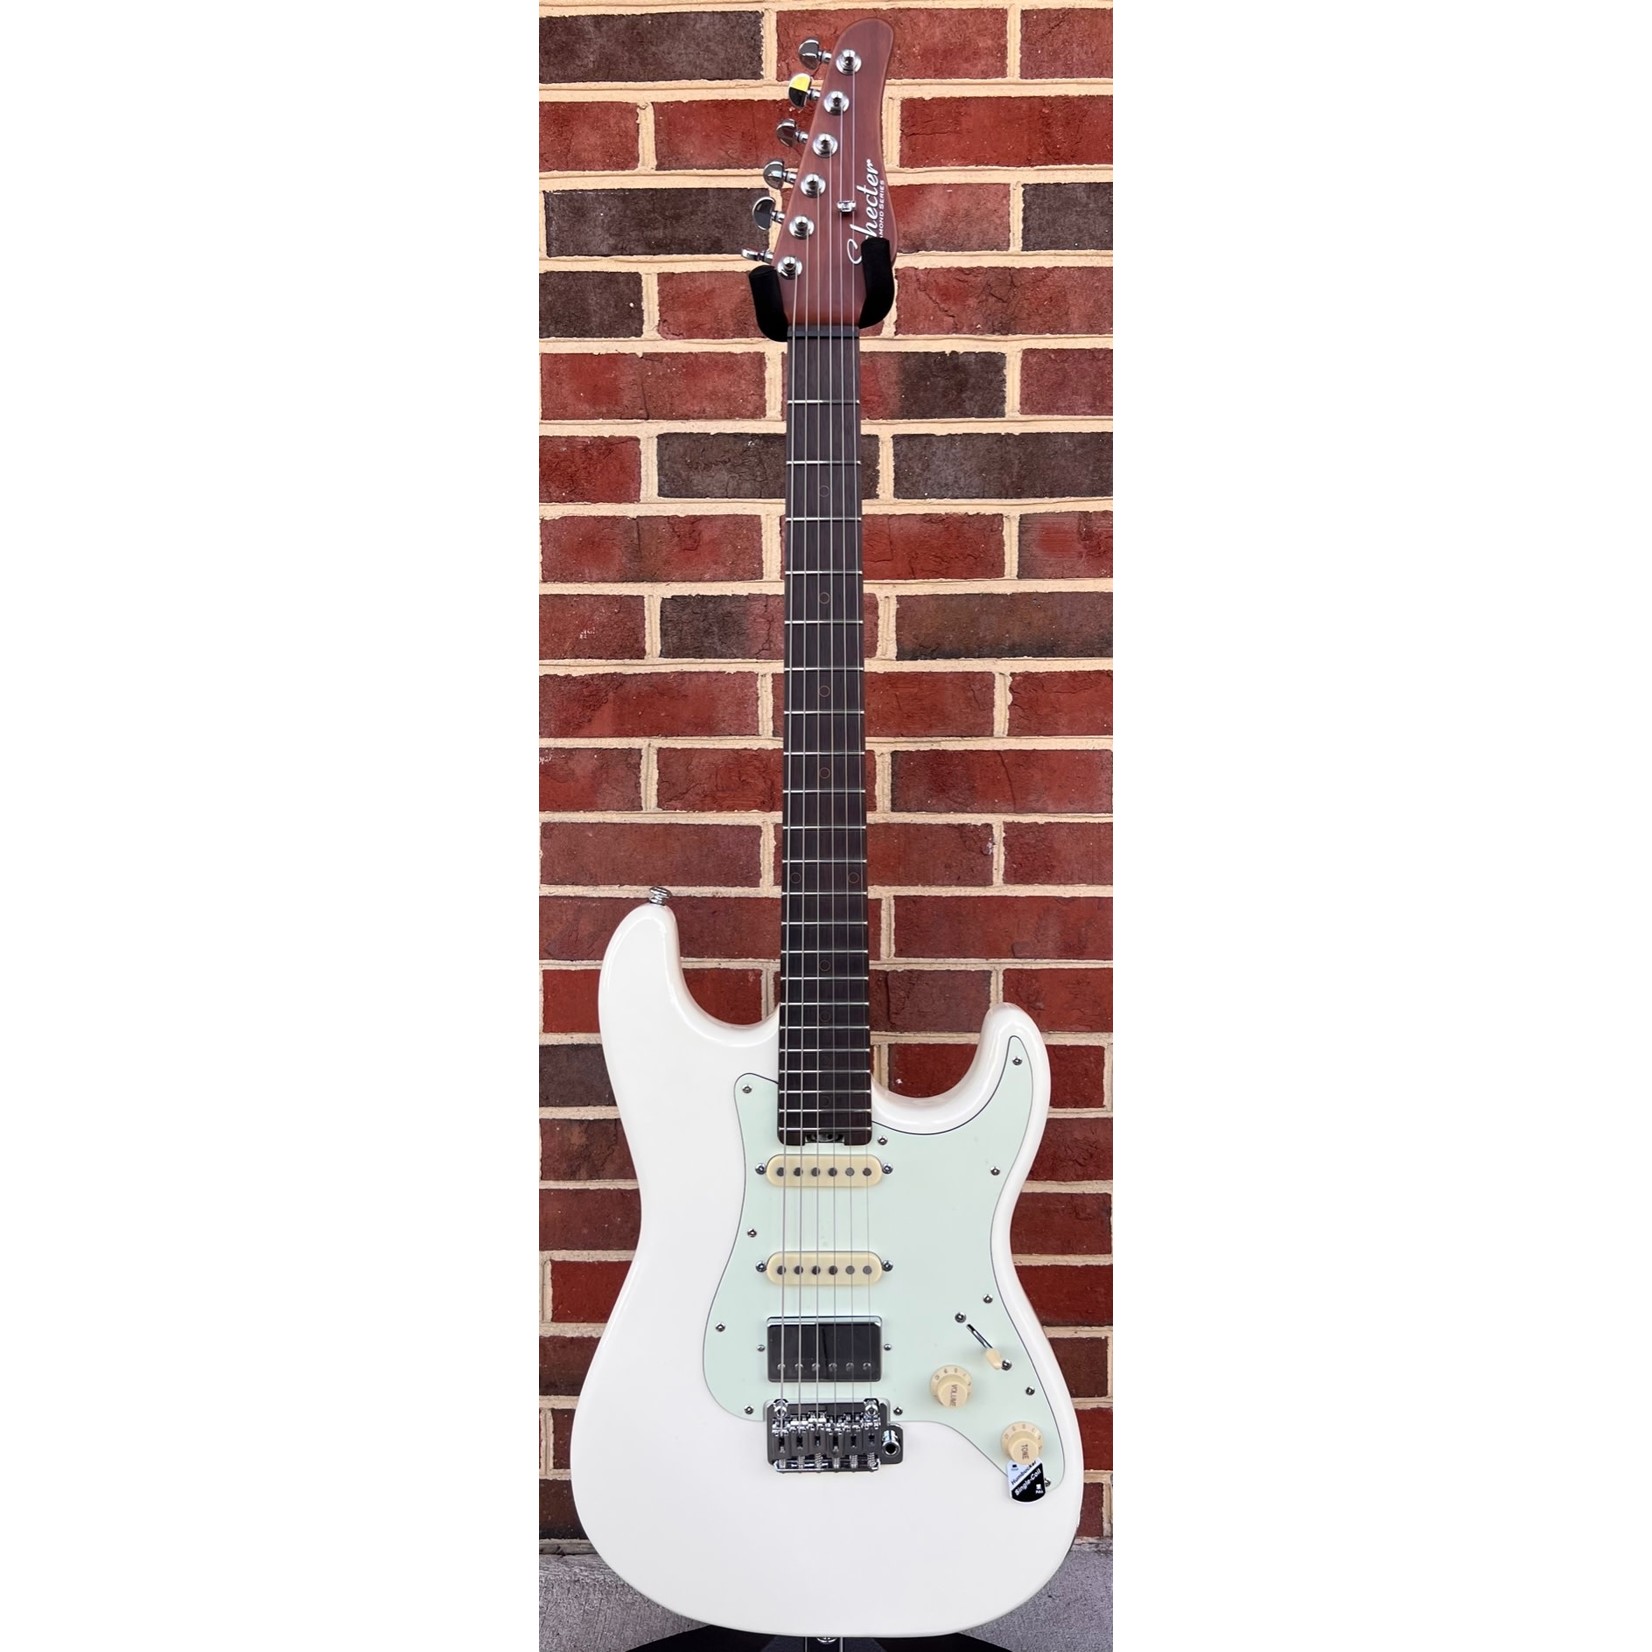 Schecter Guitar Research Schecter Nick Johnston Traditional HSS, Atomic Snow, Ebony Fretboard, Roasted Maple Neck, Locking Tuners